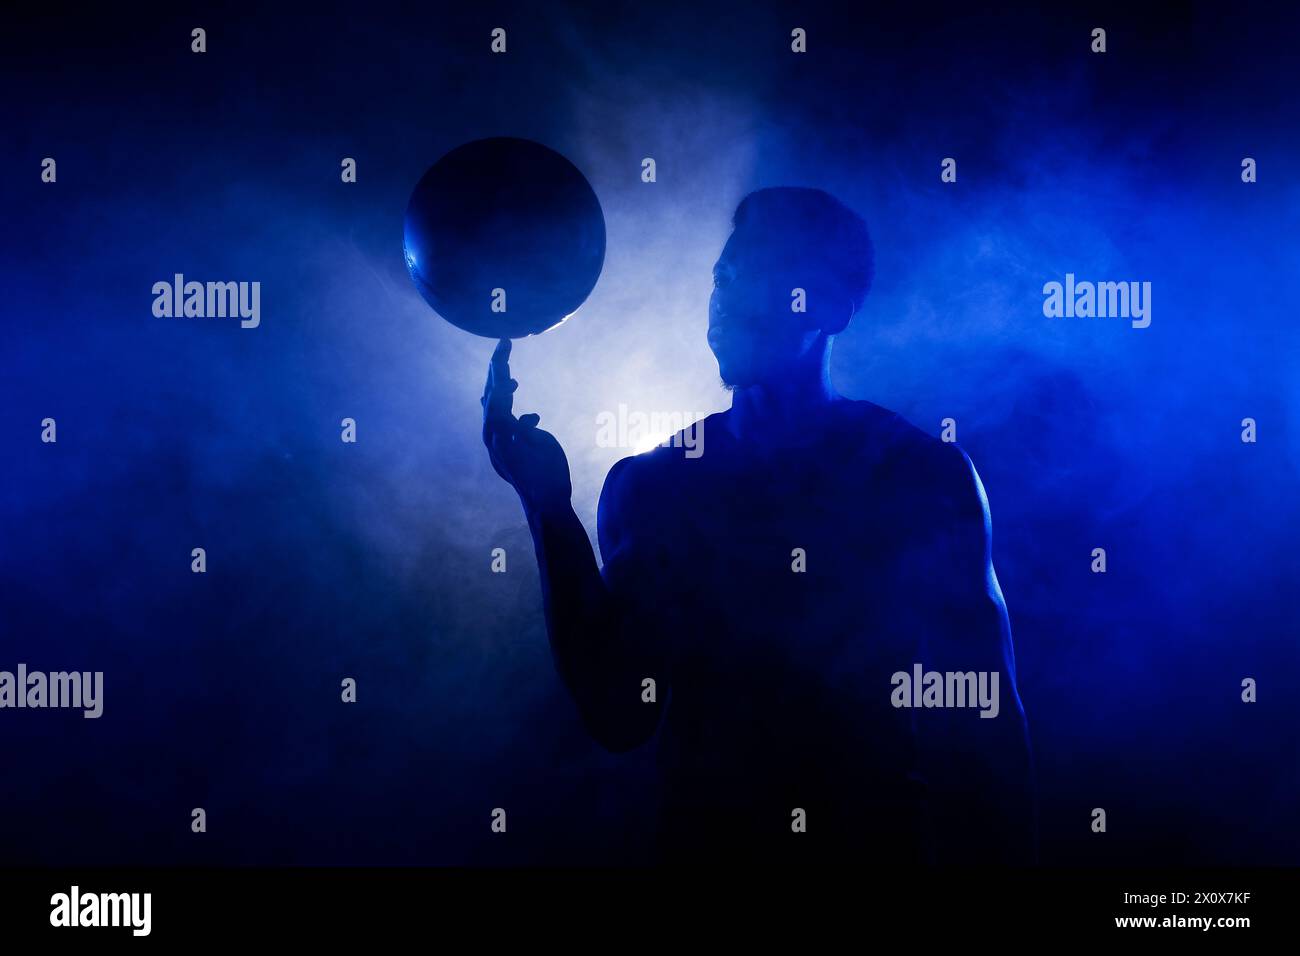 Basketball player silhouette lit with blue color spinning a ball against smoke background. Muscular african american man. Stock Photo